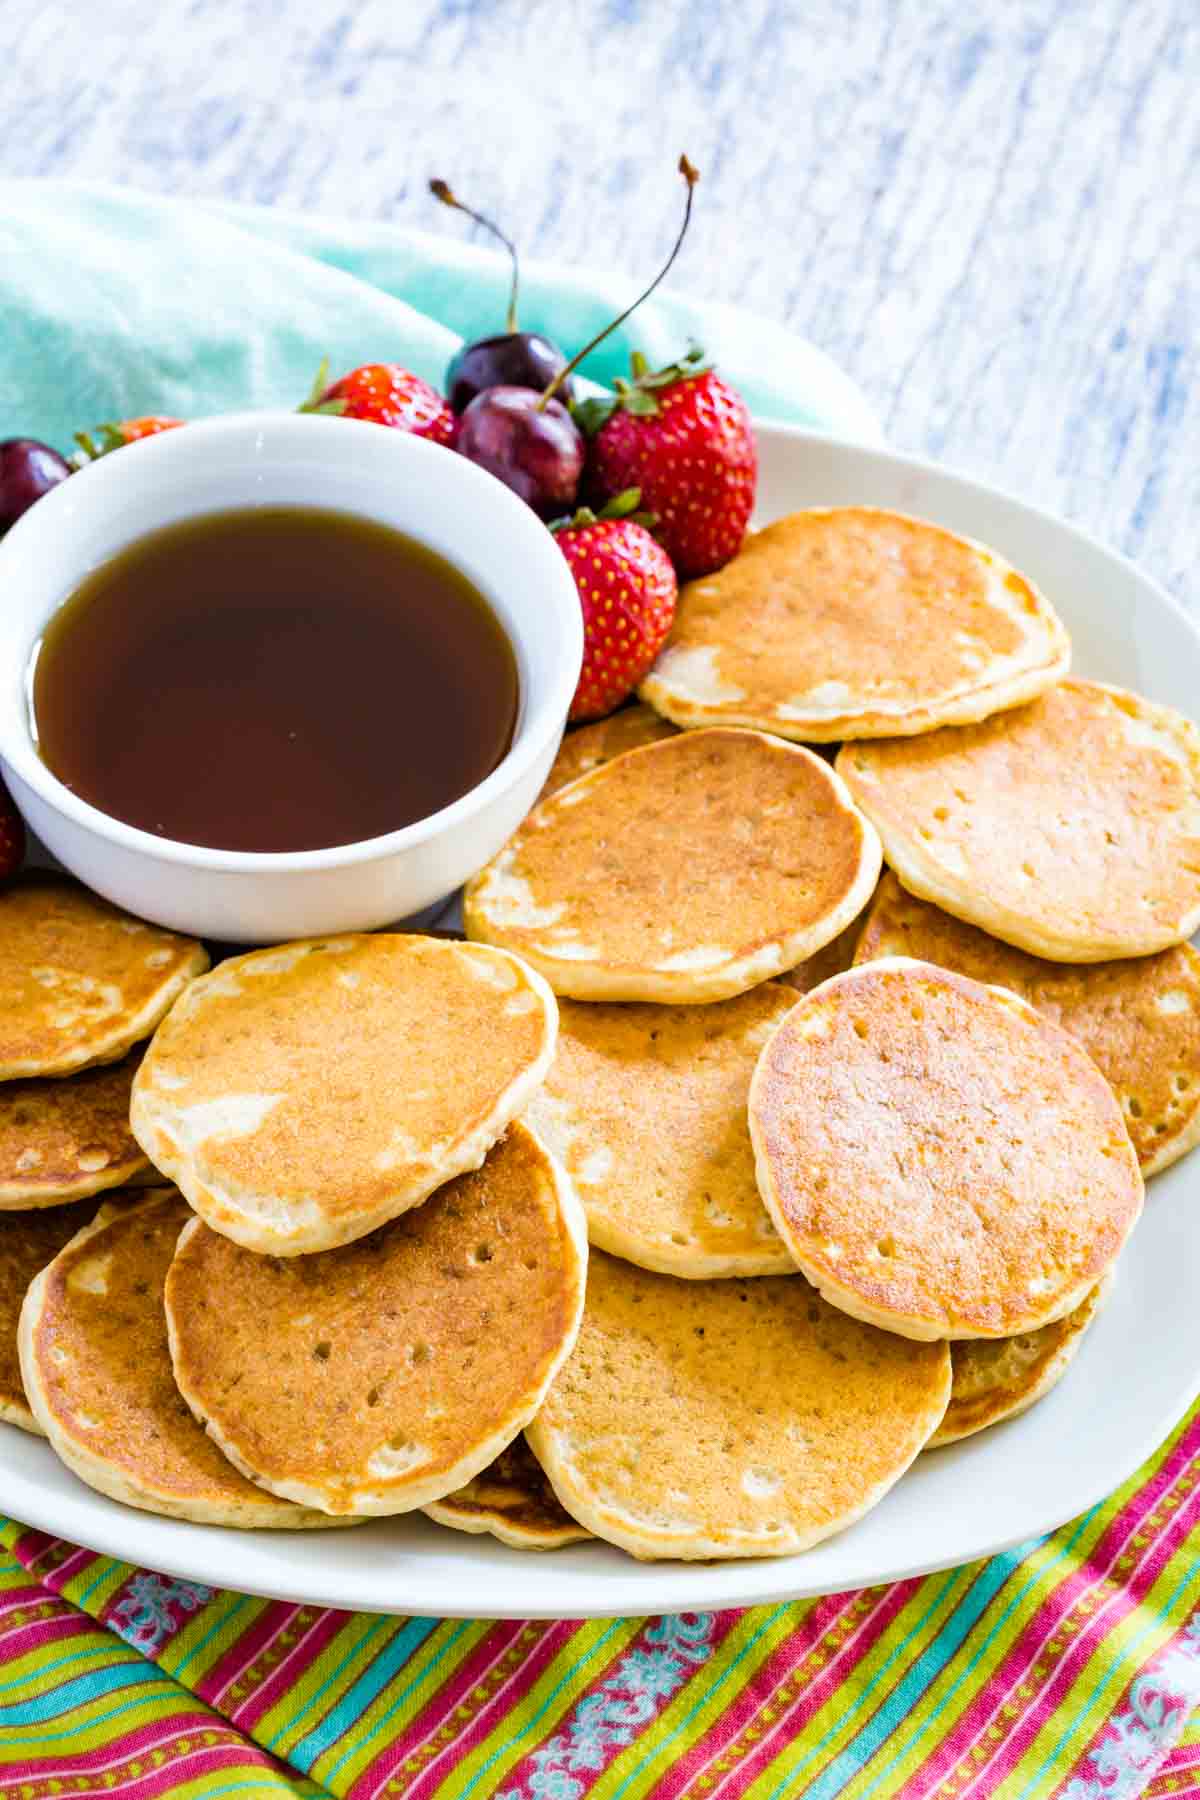 A plate of gluten free silver dollar pancakes with a bowl of maple syrup and strawberries.